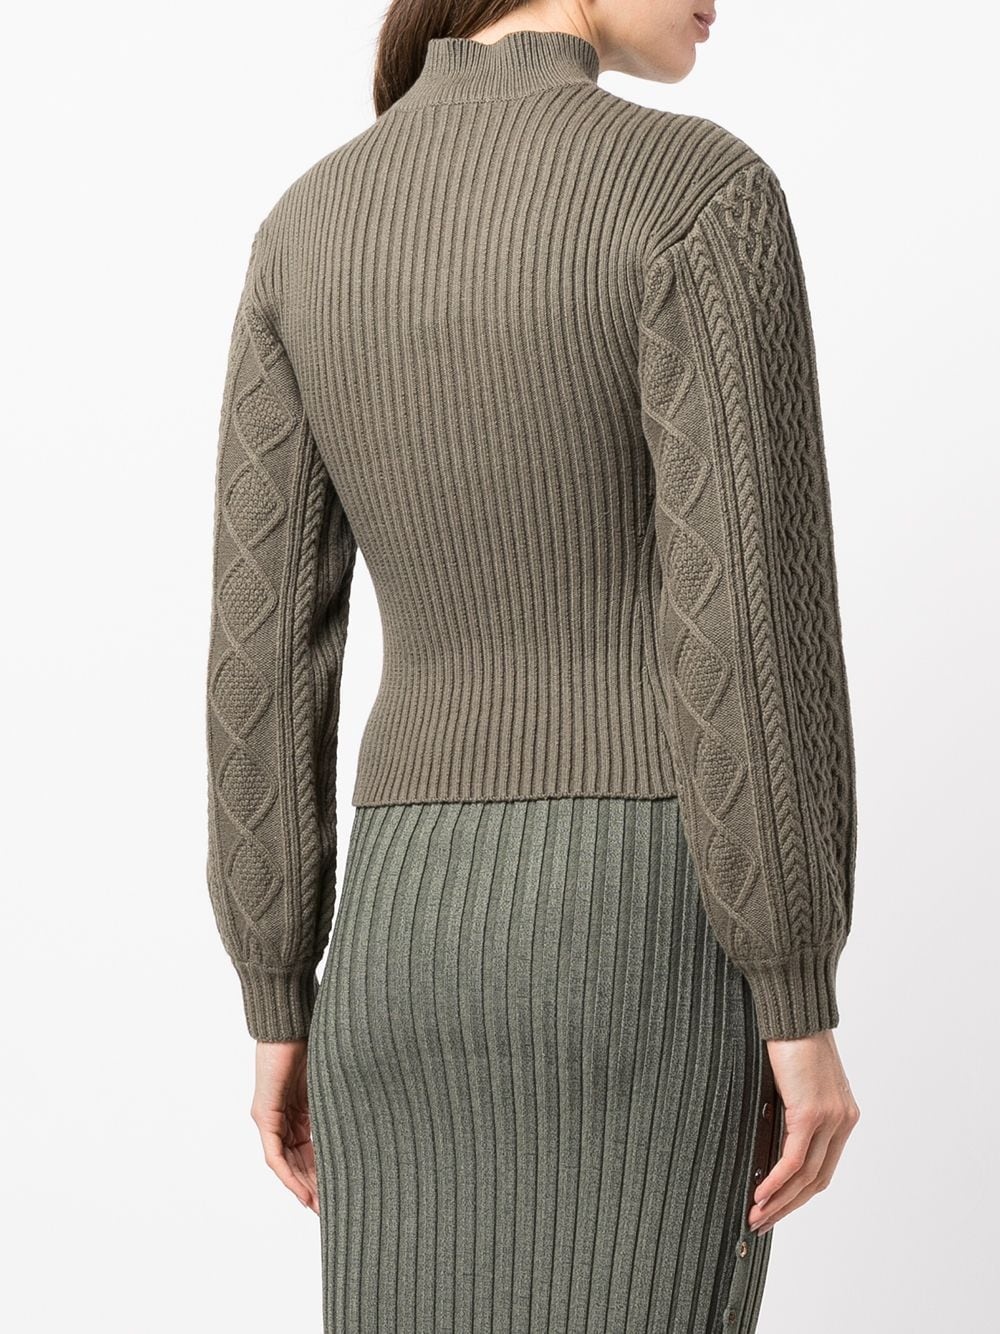 ribbed-knit cut-out jumper - 4